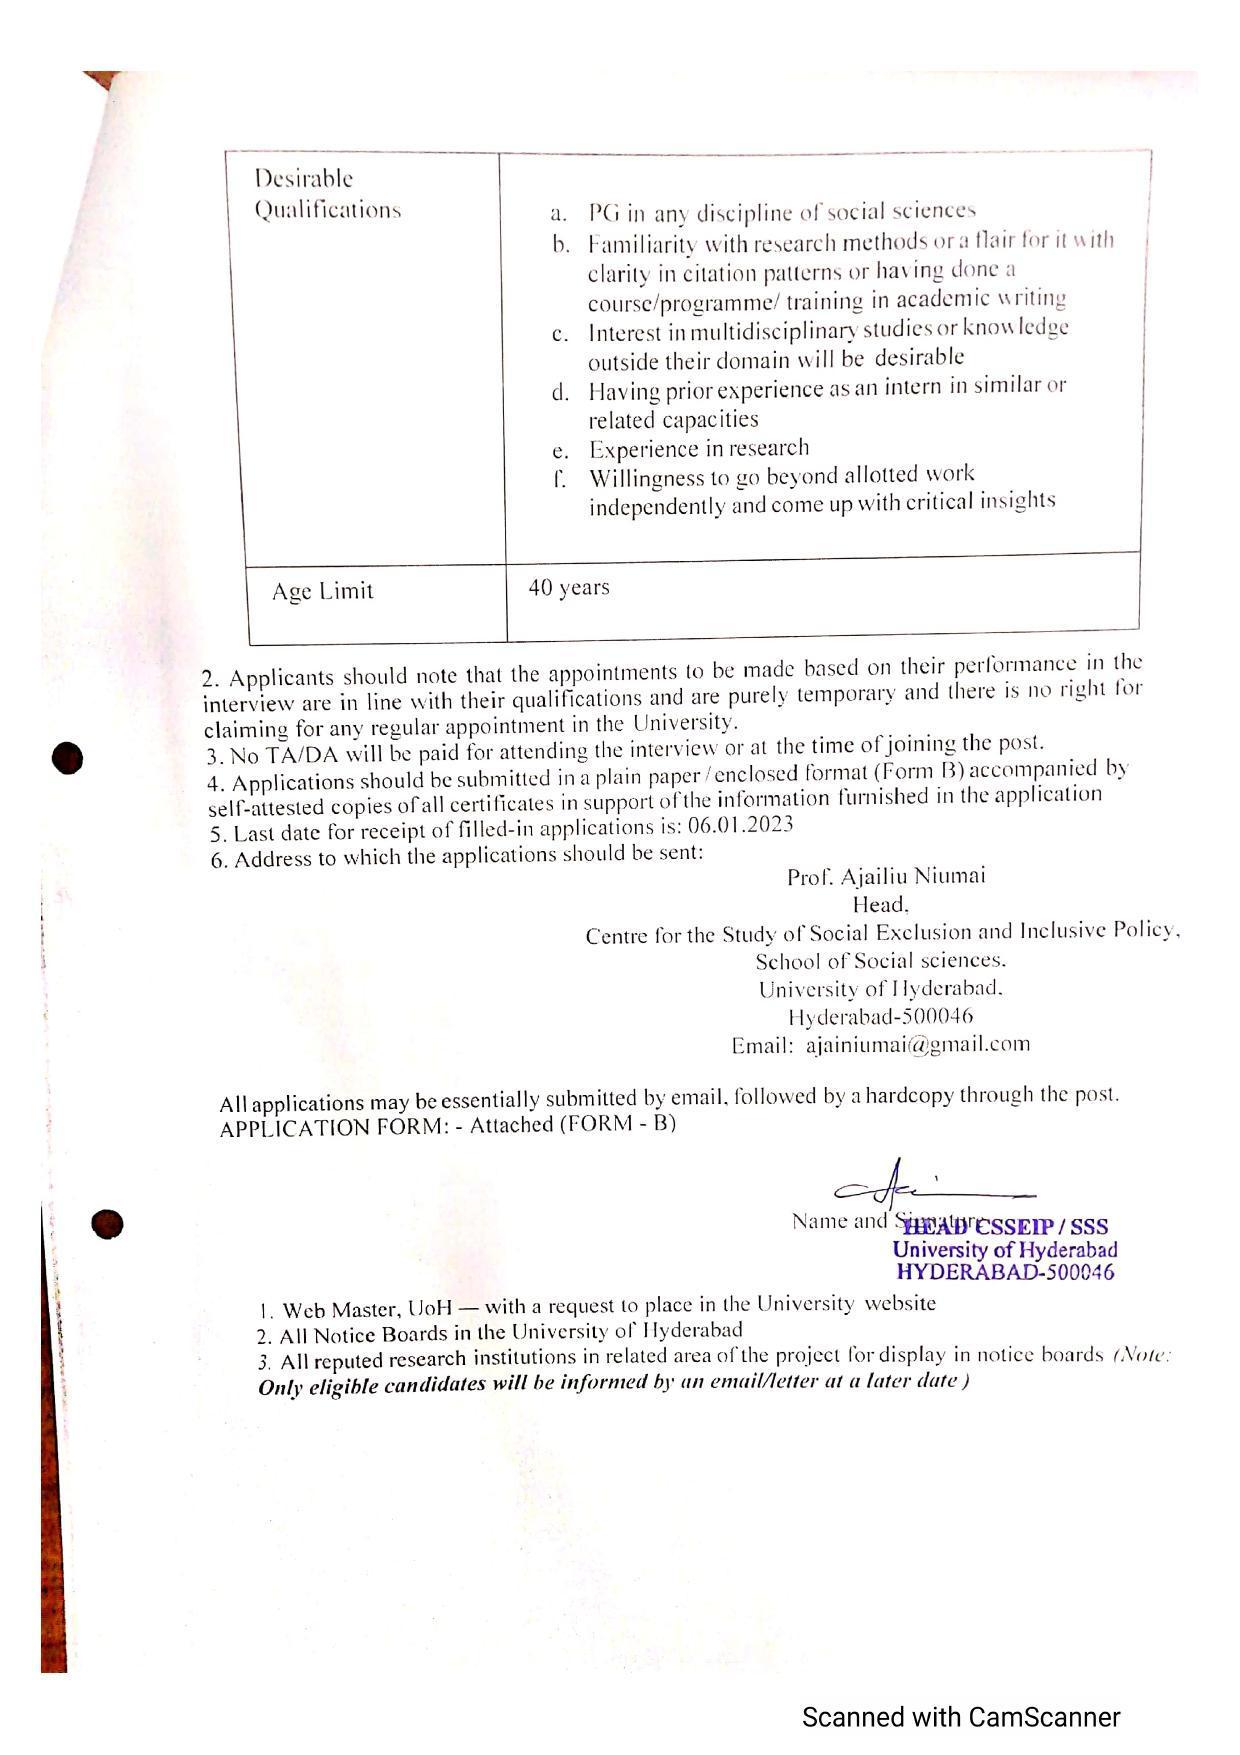 University of Hyderabad (UoH) Invites Application for Research Intern Recruitment 2022 - Page 1